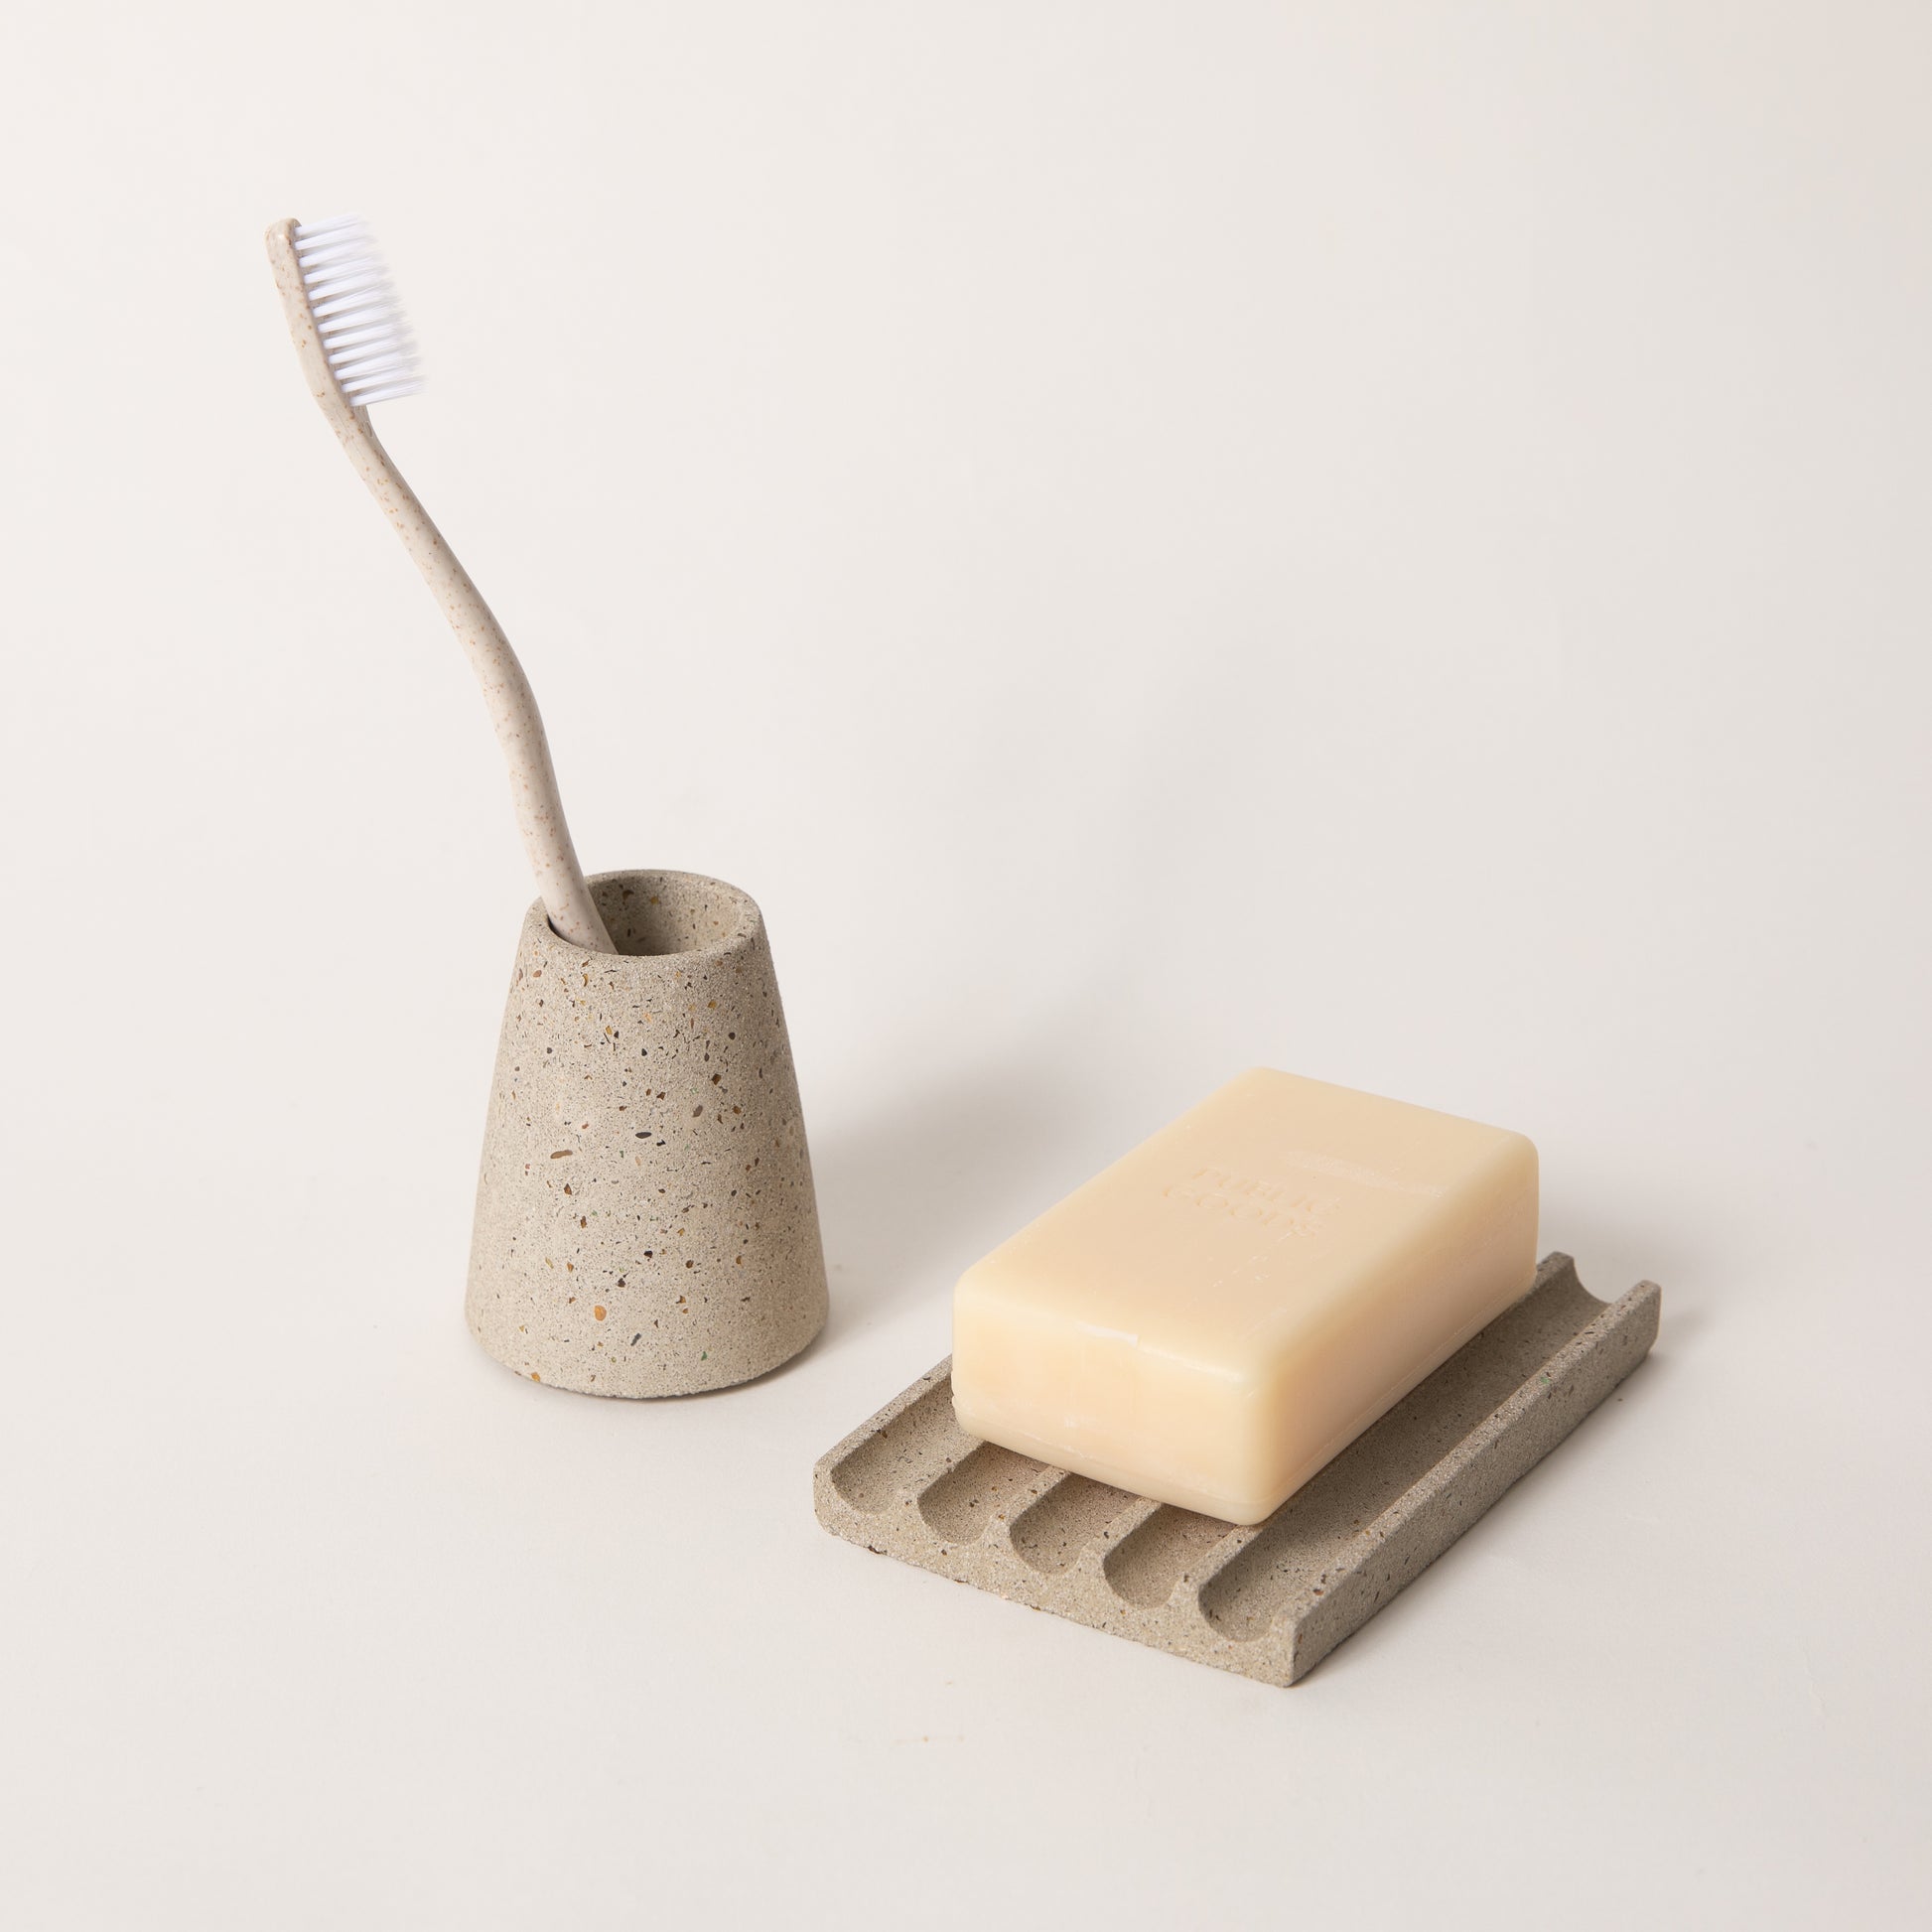 Natural terrazzo toothbrush holder & soap dish set, styled with a toothbrush & bar of soap.